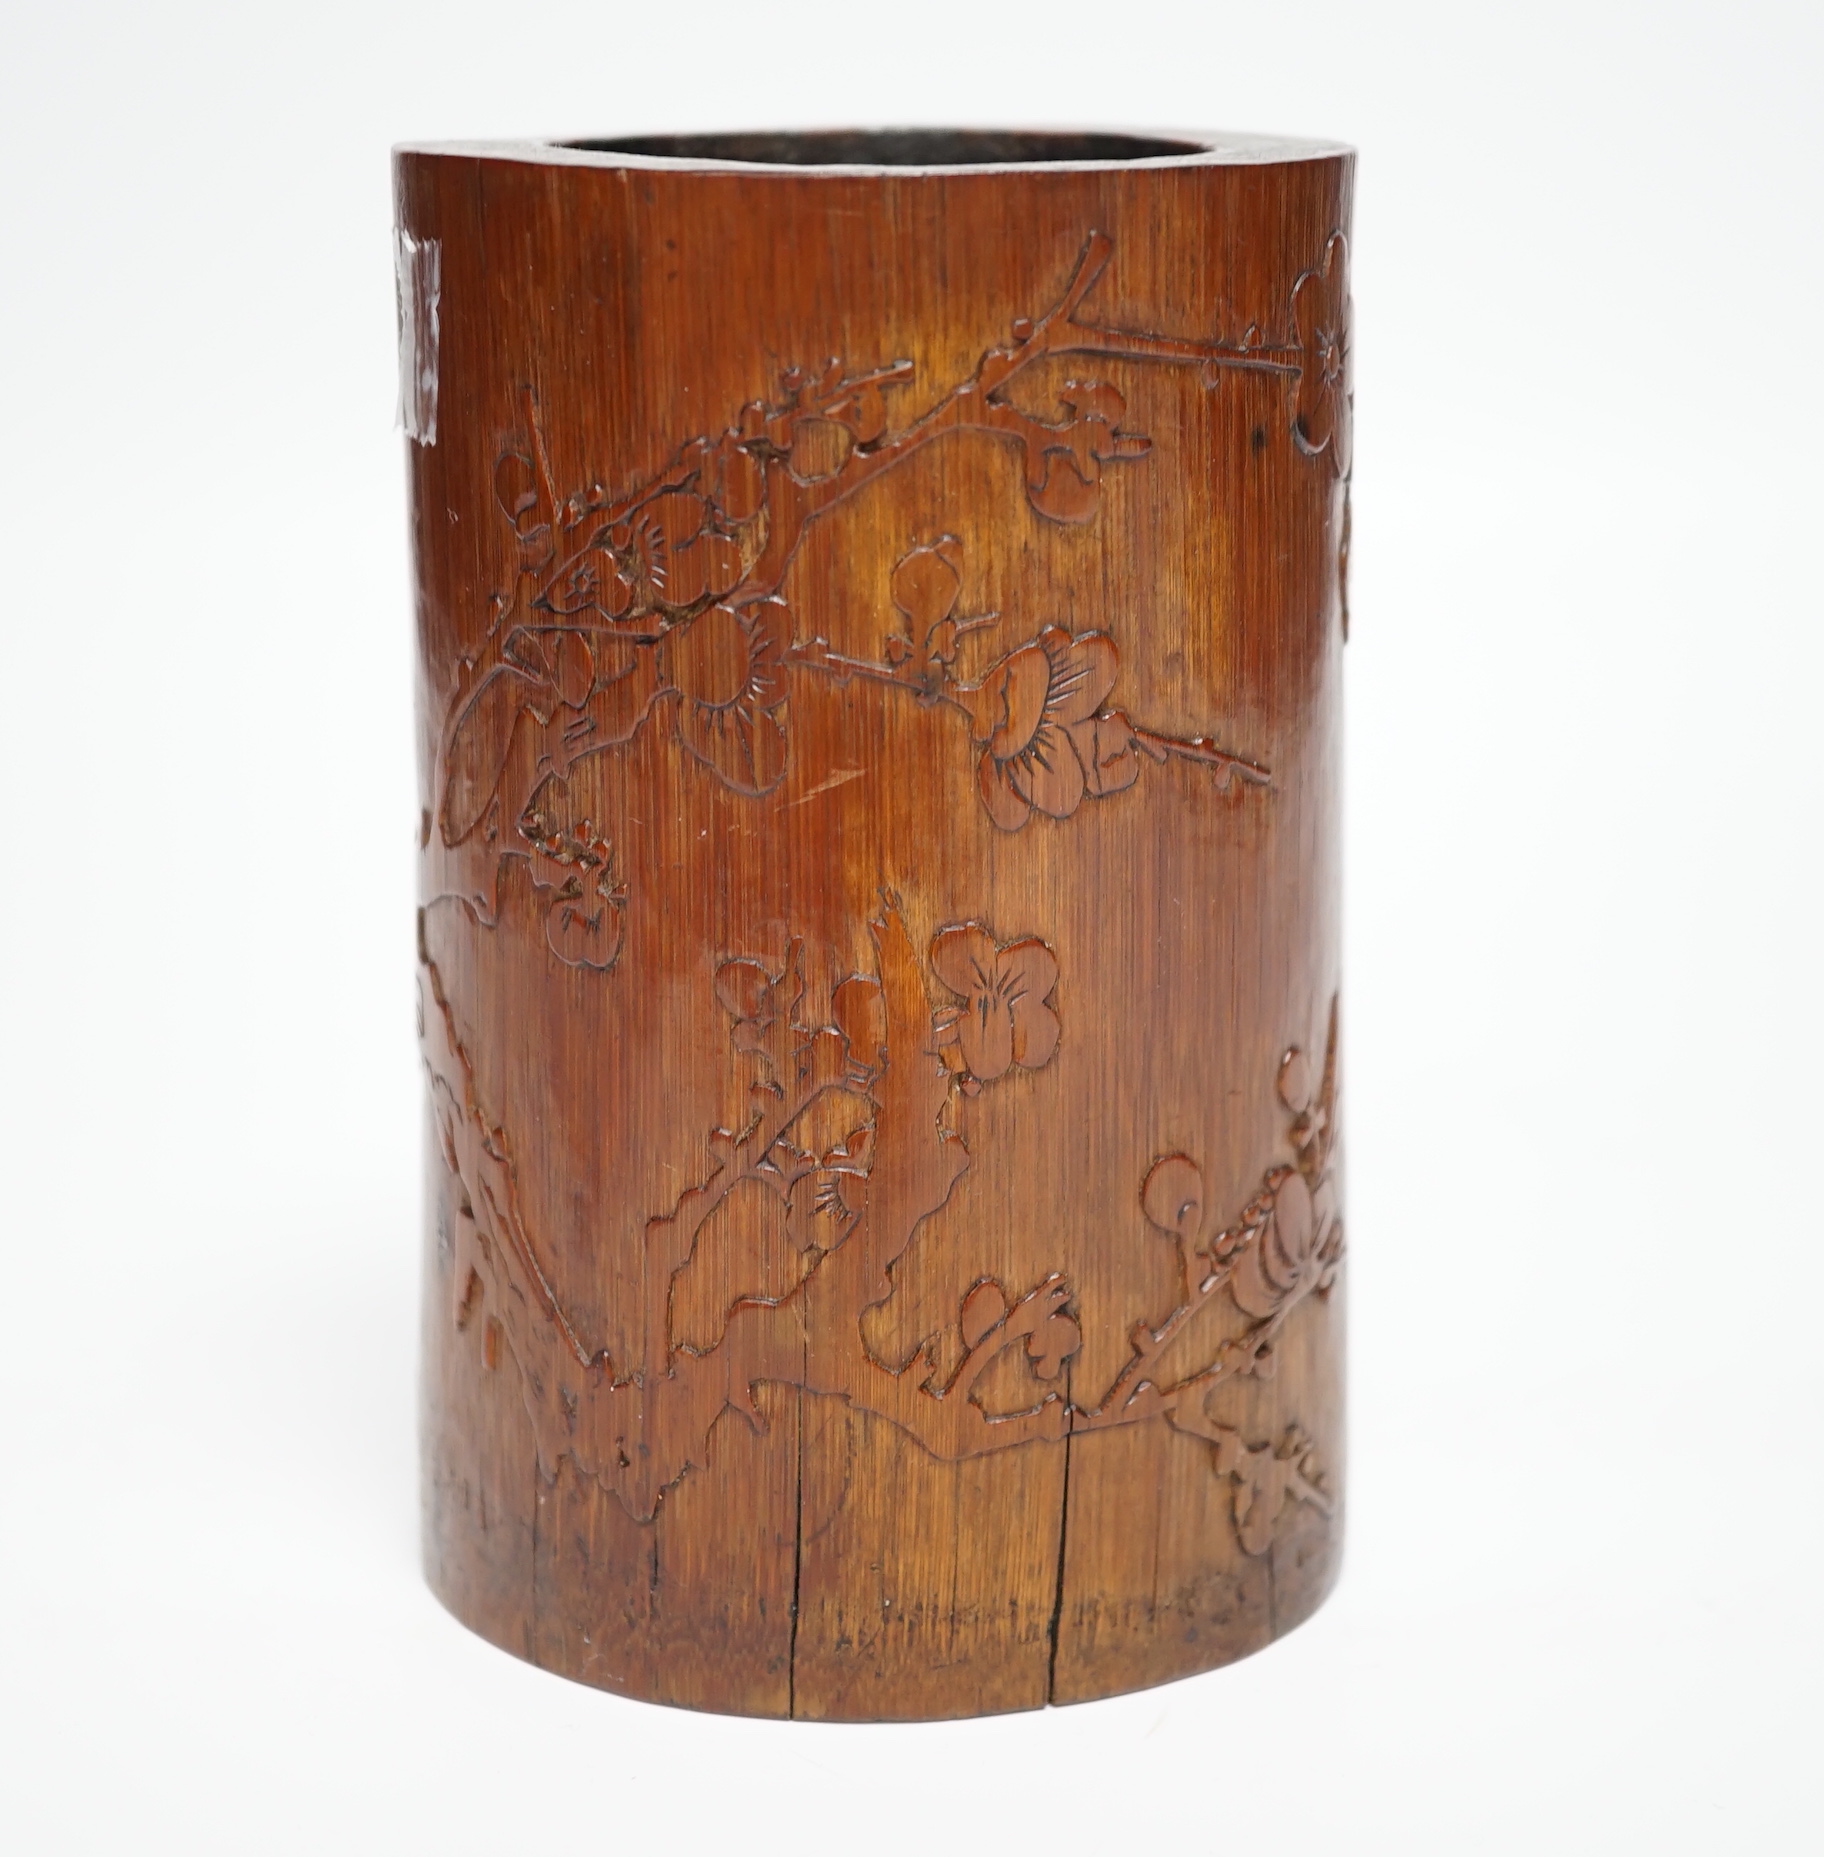 A 19th century Chinese Daoist bamboo brushpot, inscribed with a poem, 13cm high